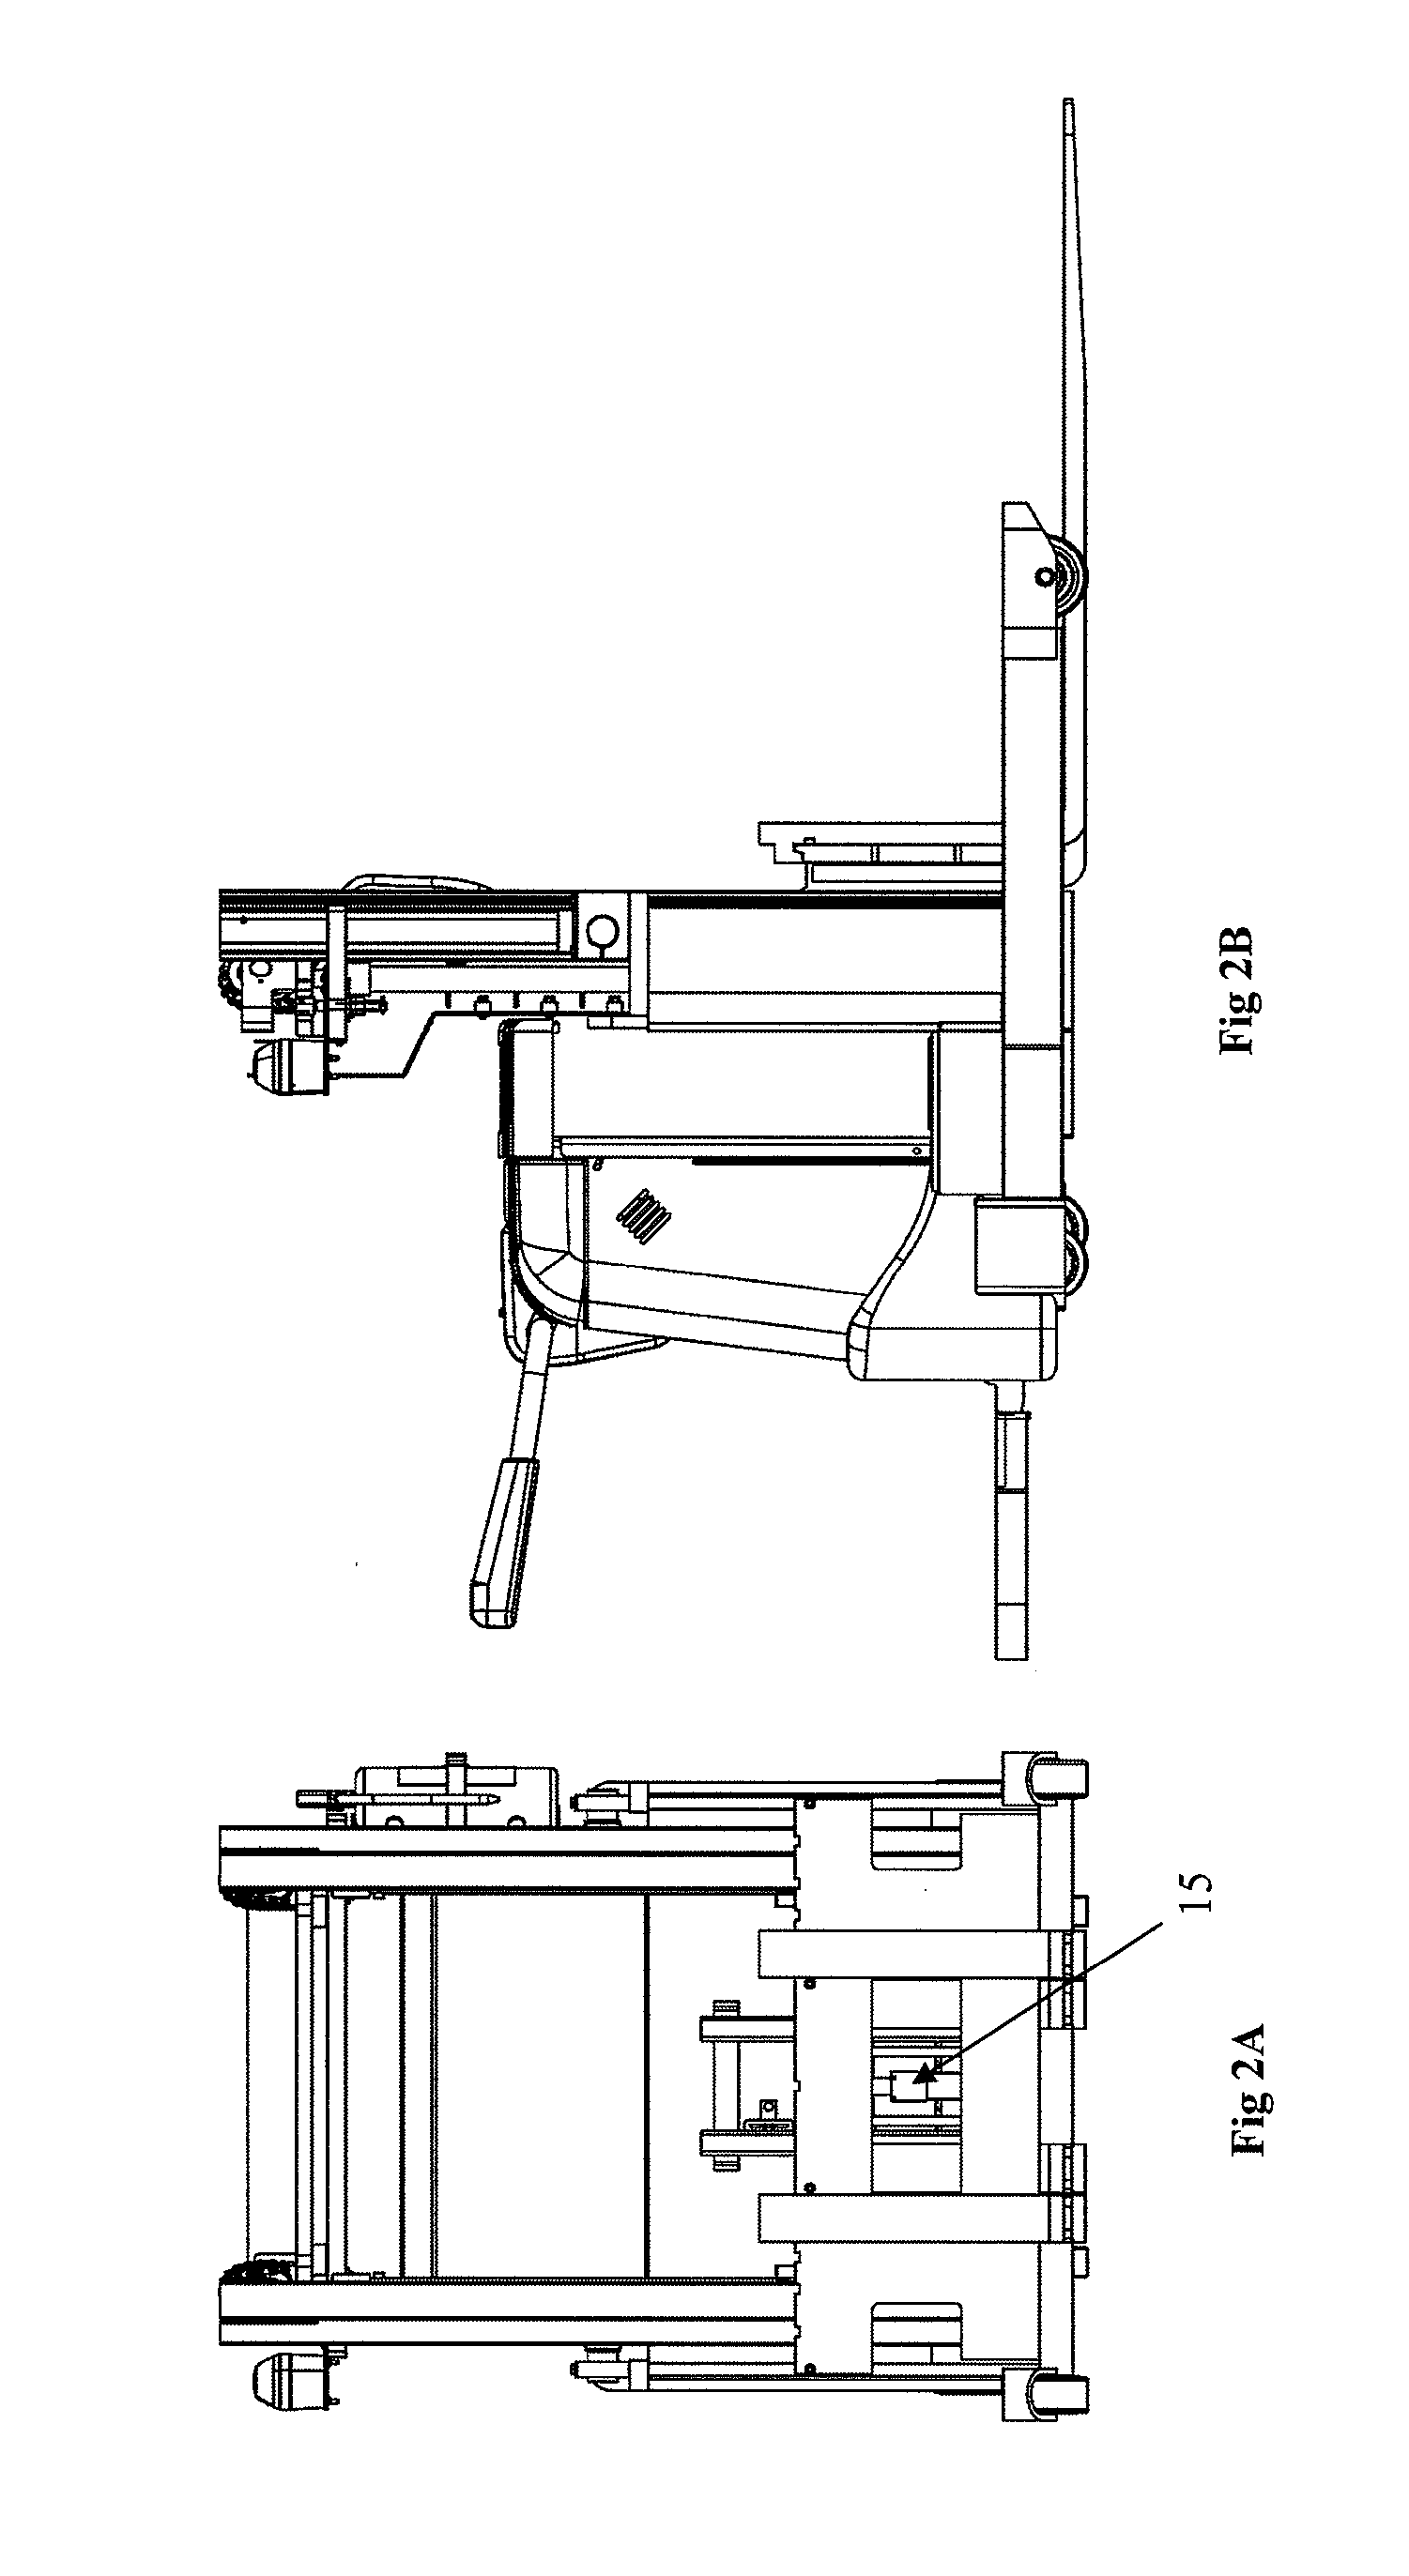 Industrial truck comprising two load carriages